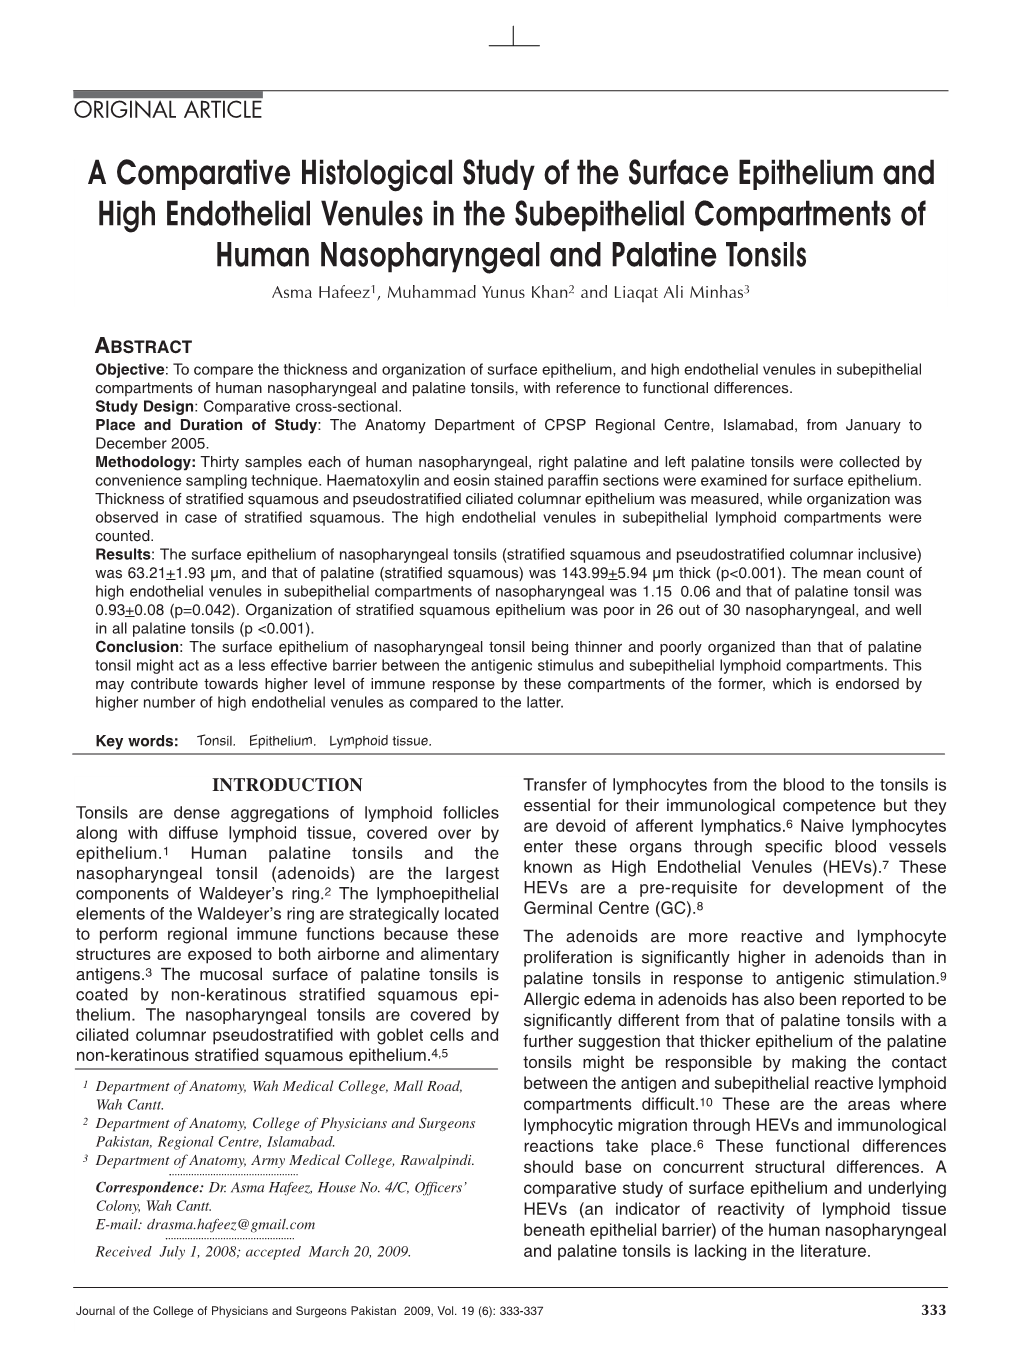 A Comparative Histological Study of the Surface Epithelium and High